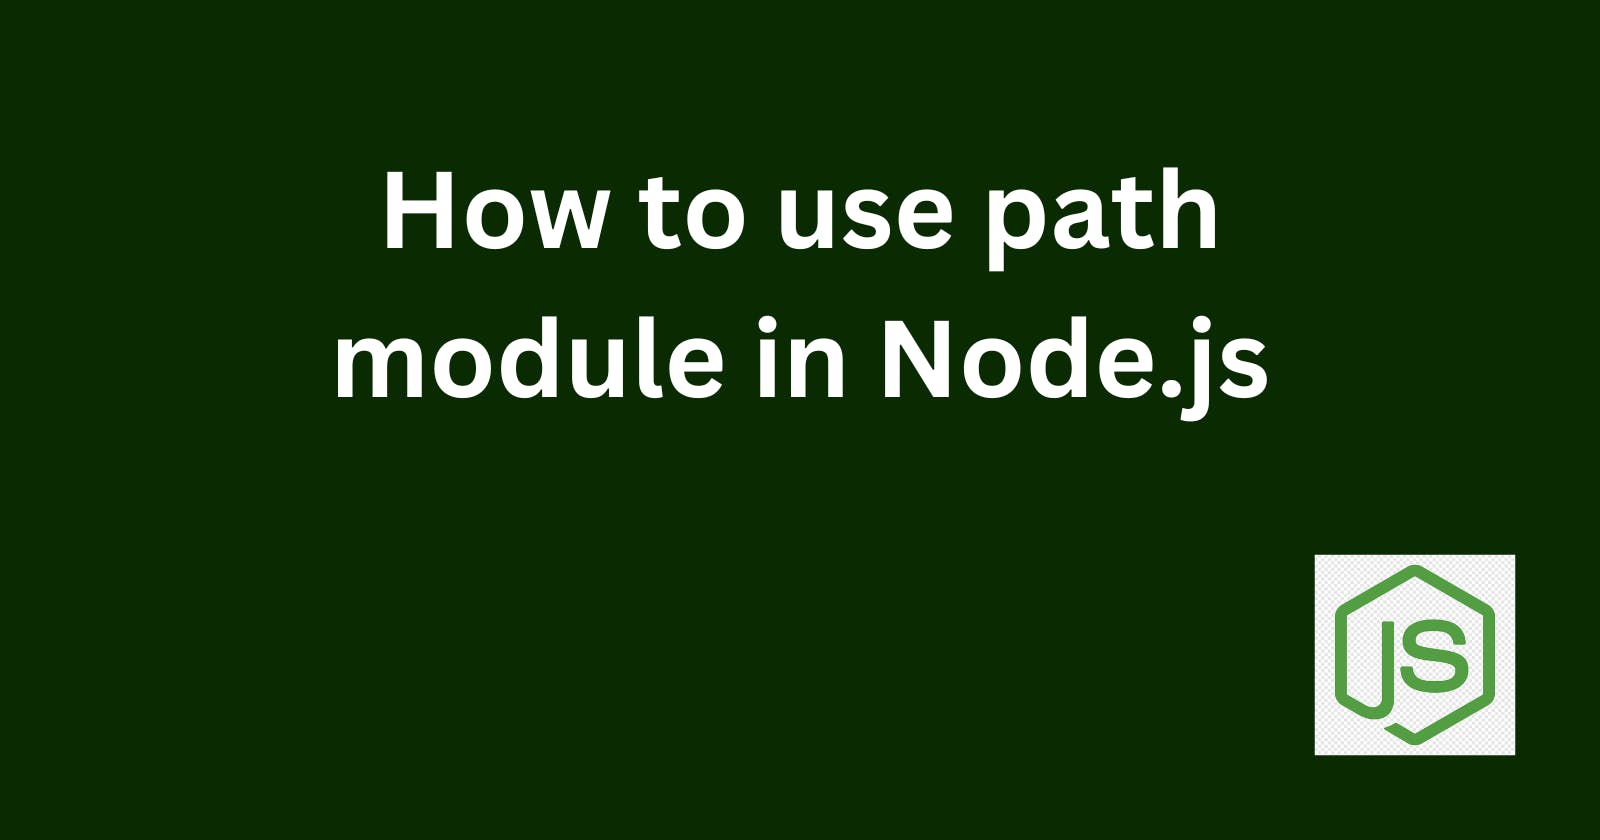 How to use the path module in Node.js?